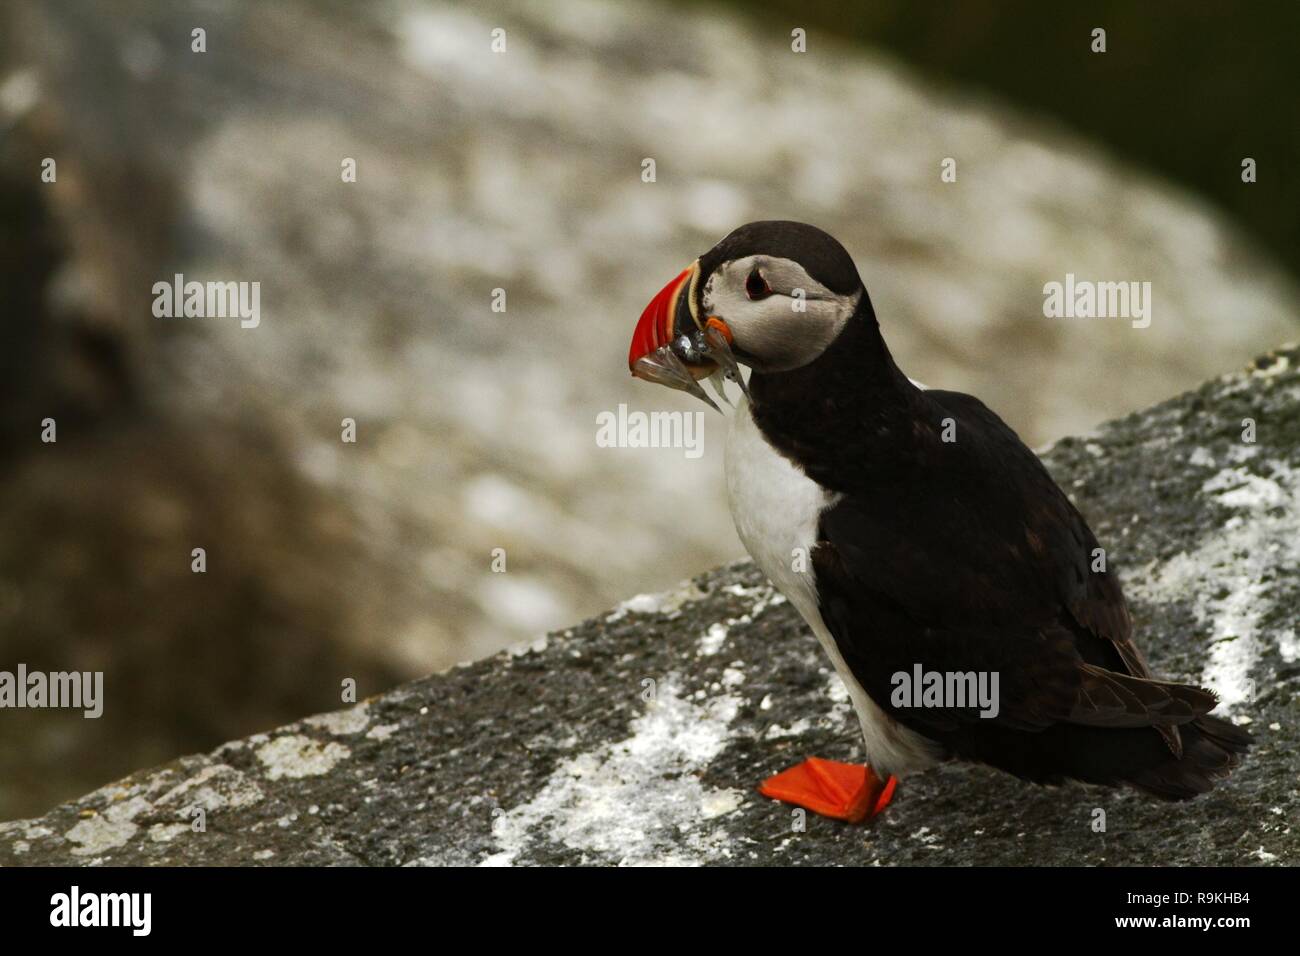 Atlantic Puffin sitting on cliff, bird in nesting colony, arctic black and white cute bird with colouful beak, bird on rock, green background, Norway, Stock Photo